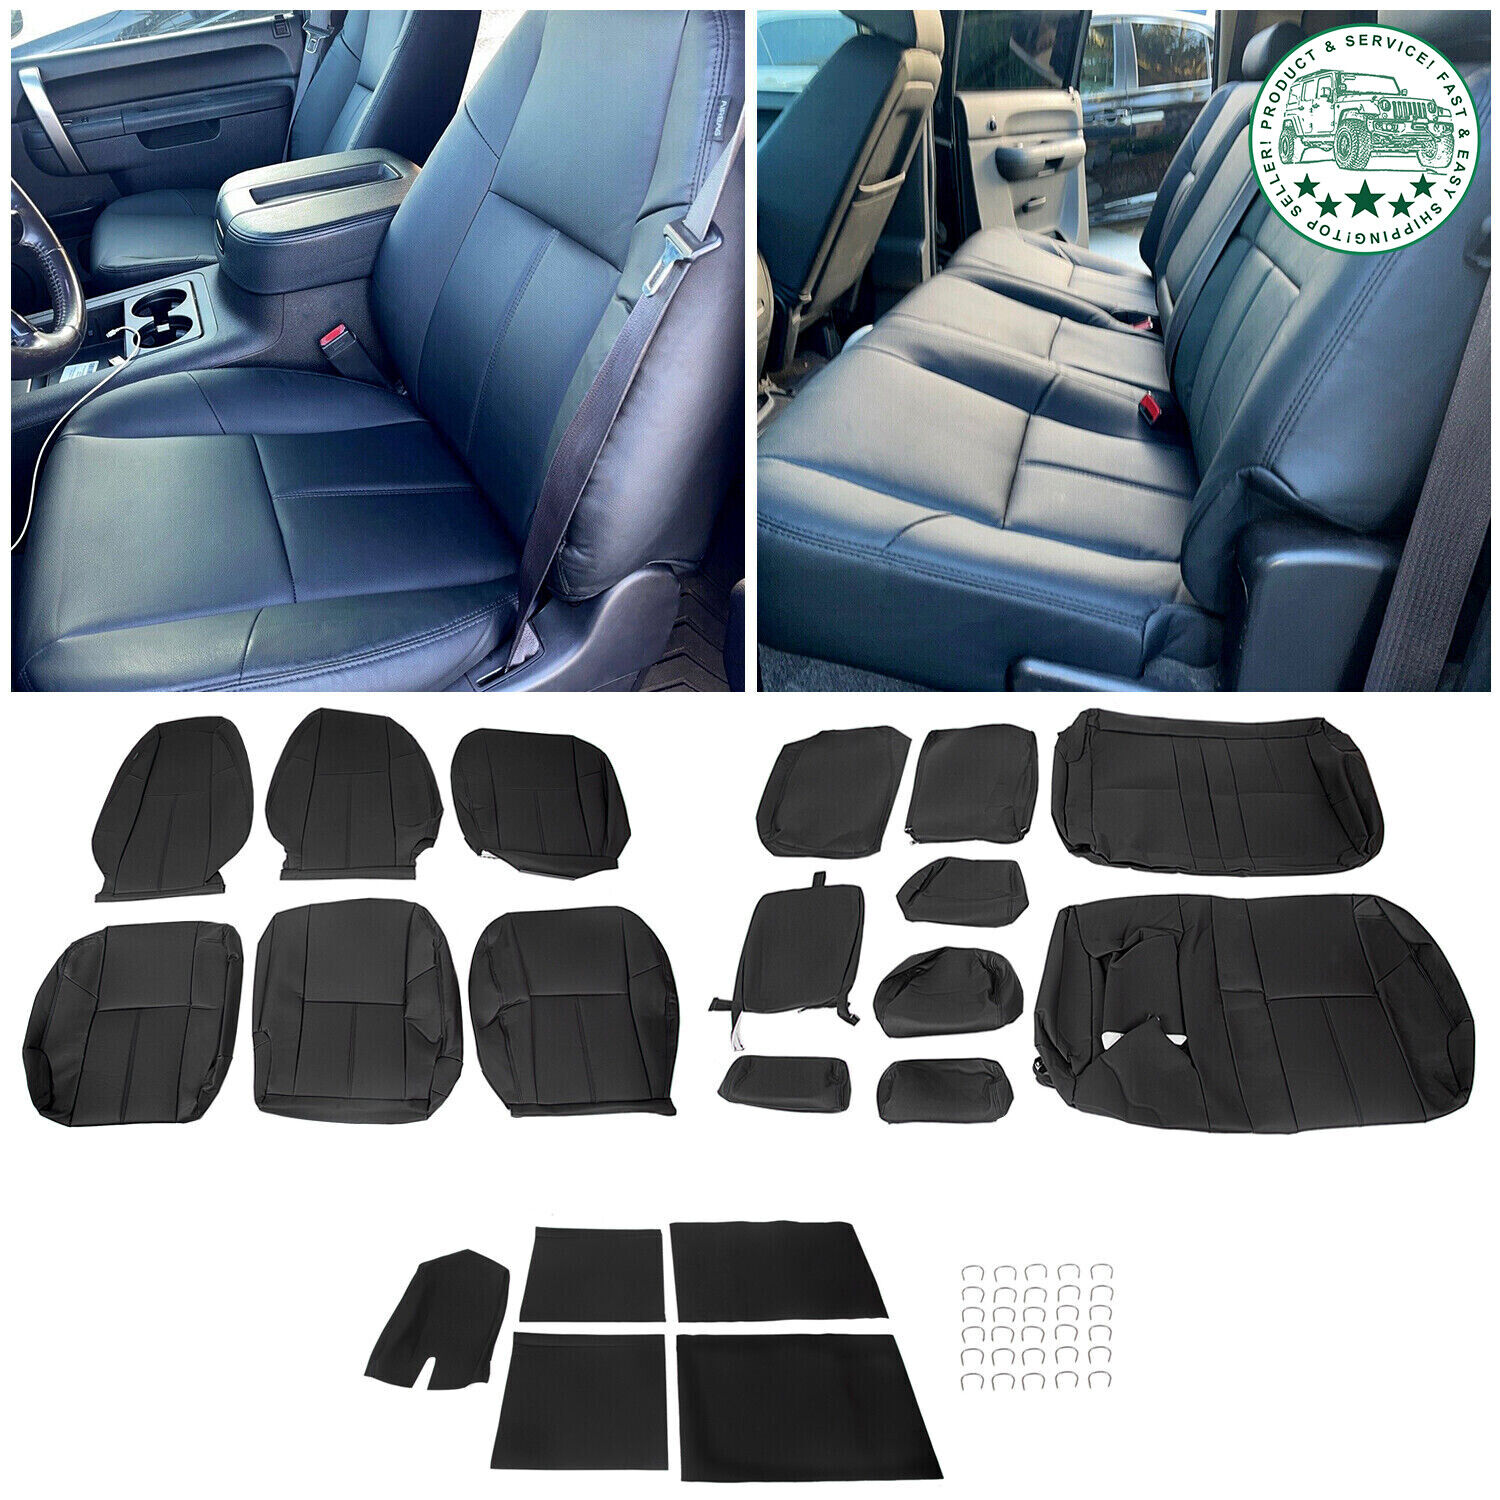 Complete Black seat cover set With Headrest For 07 -13 Chevy Silverado Crew